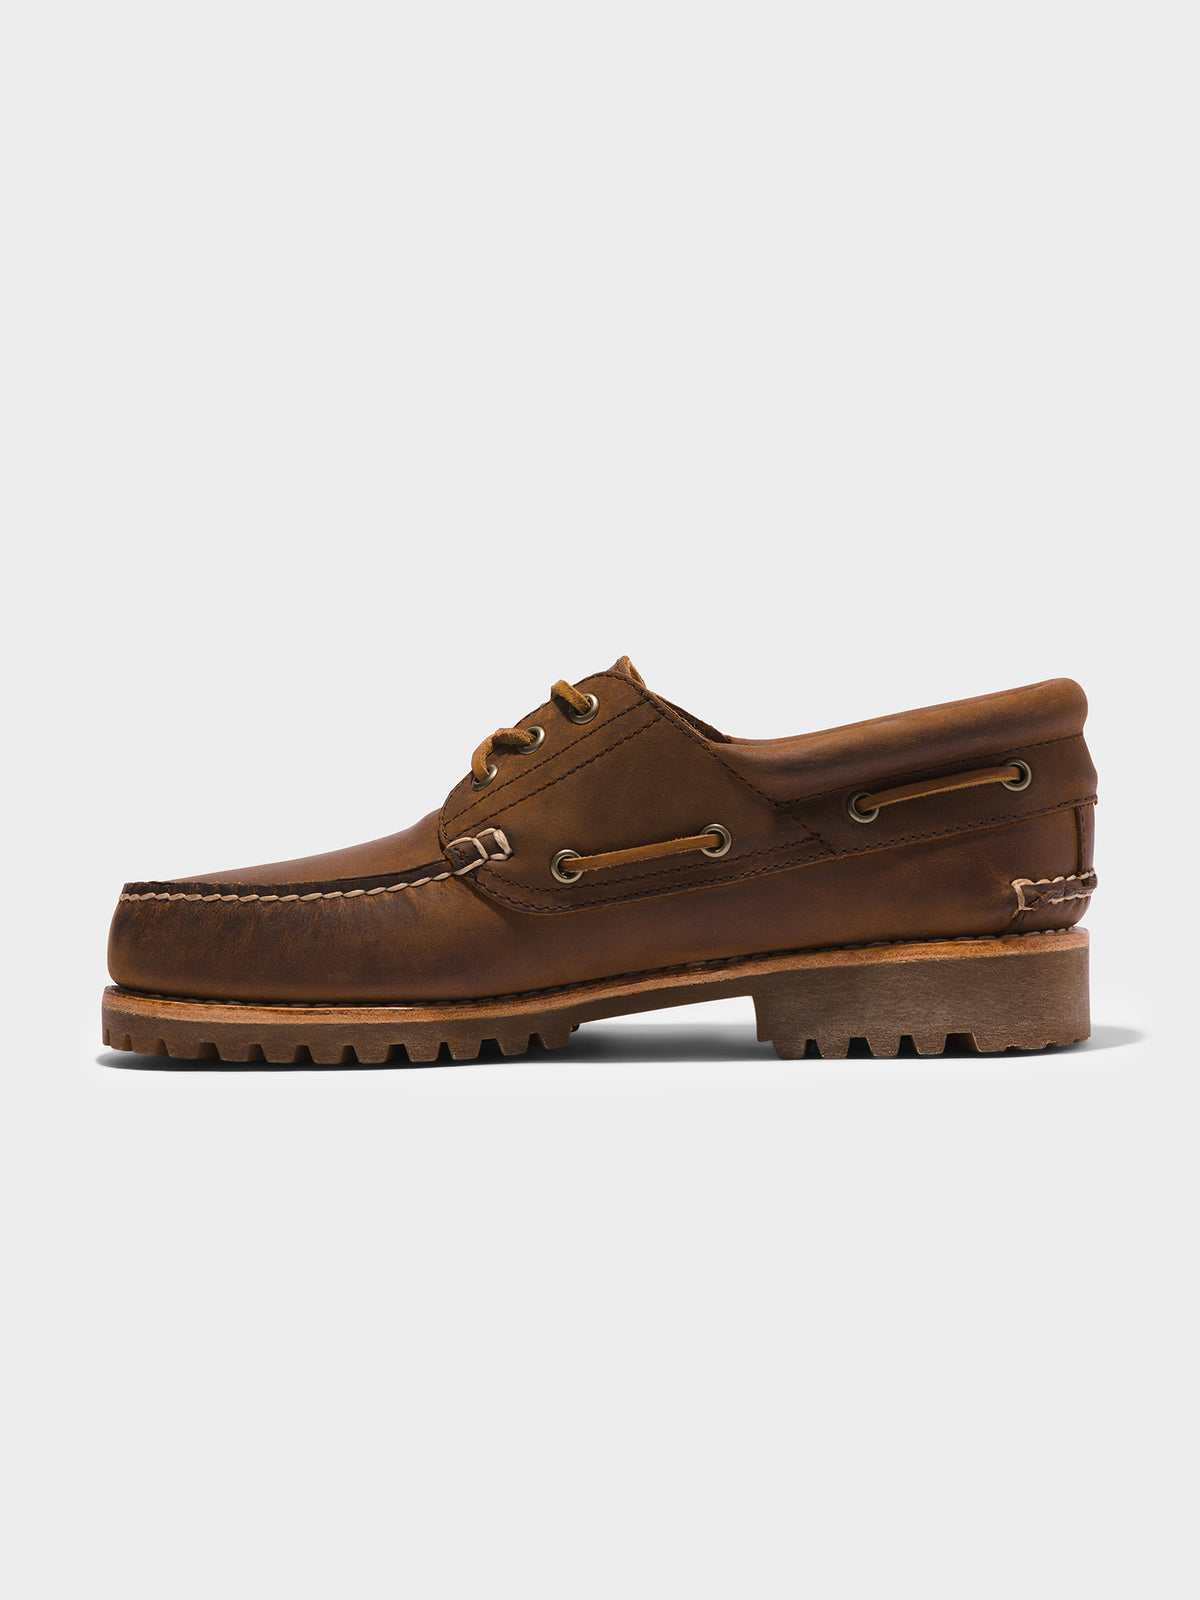 Mens 3 Eye Classic Lug Handsewn Boat Shoes in Brown